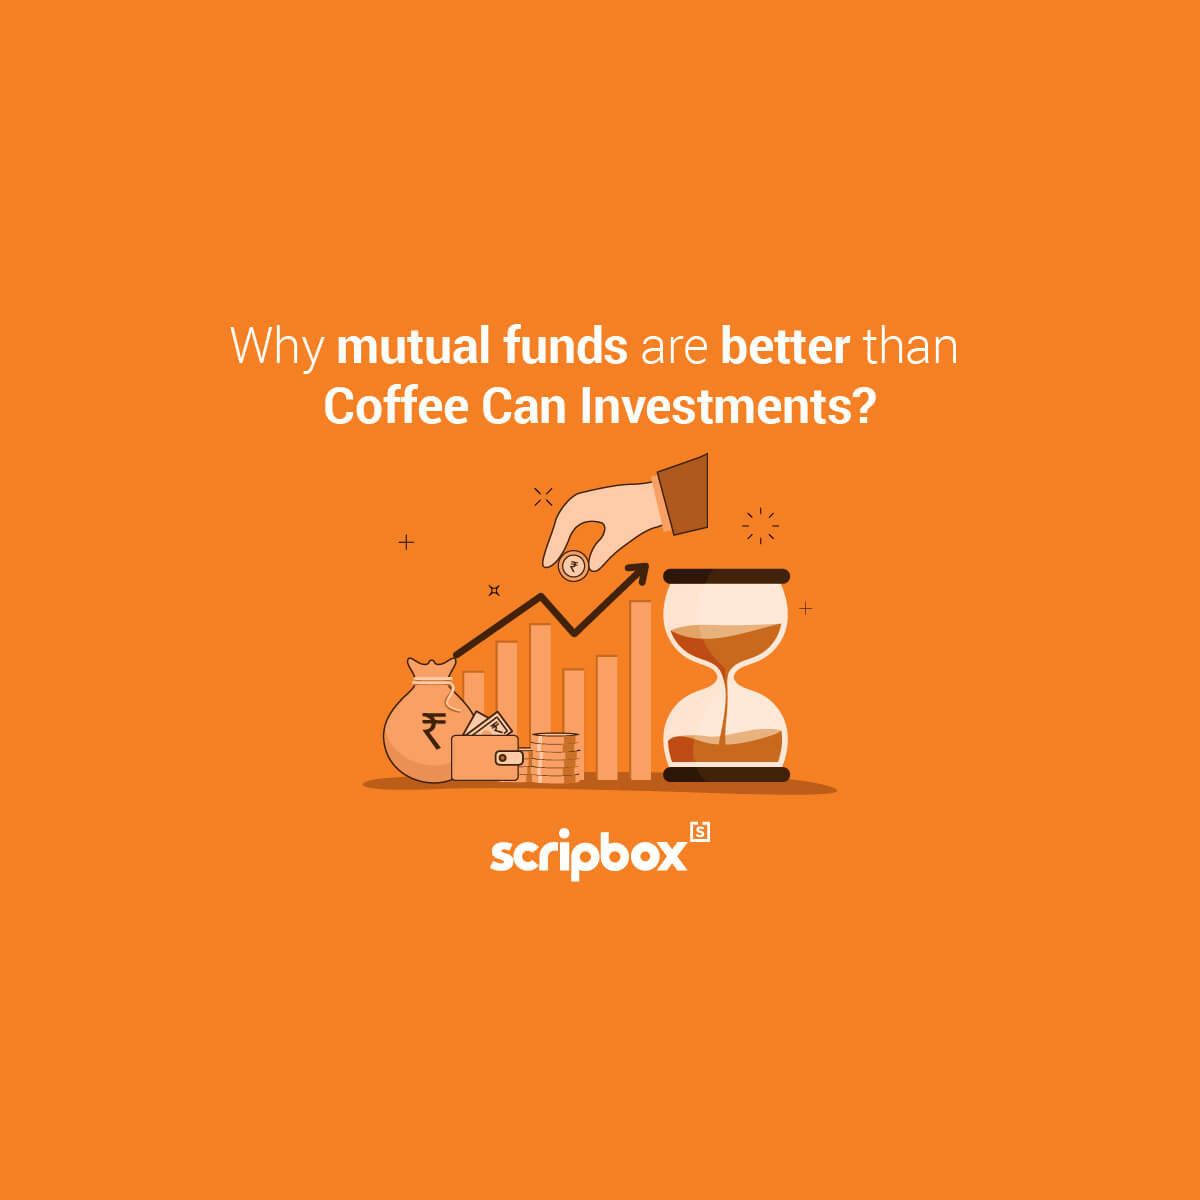 coffee-can-investing-better-mutual-funds-india